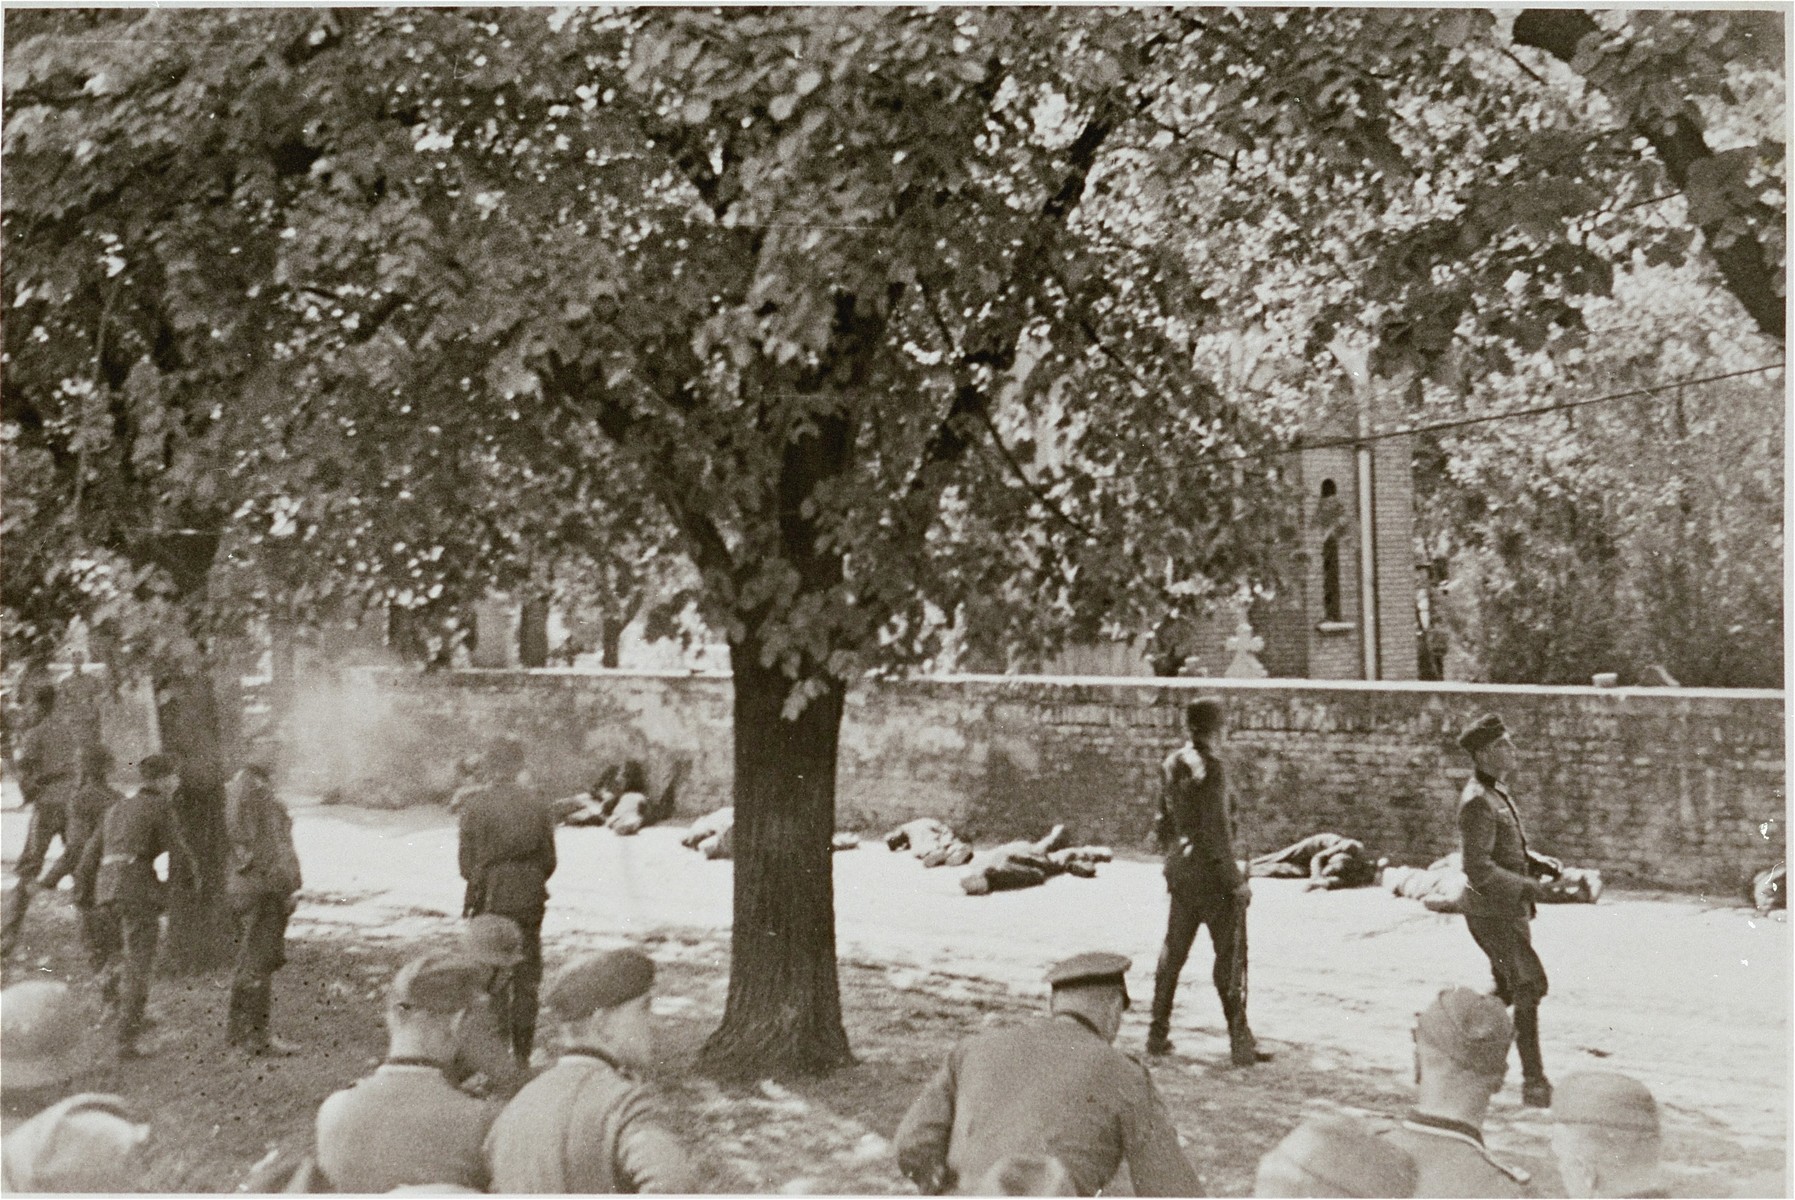 German soldiers look on as 18 civilians are shot against the wall of the cemetery in Pancevo.